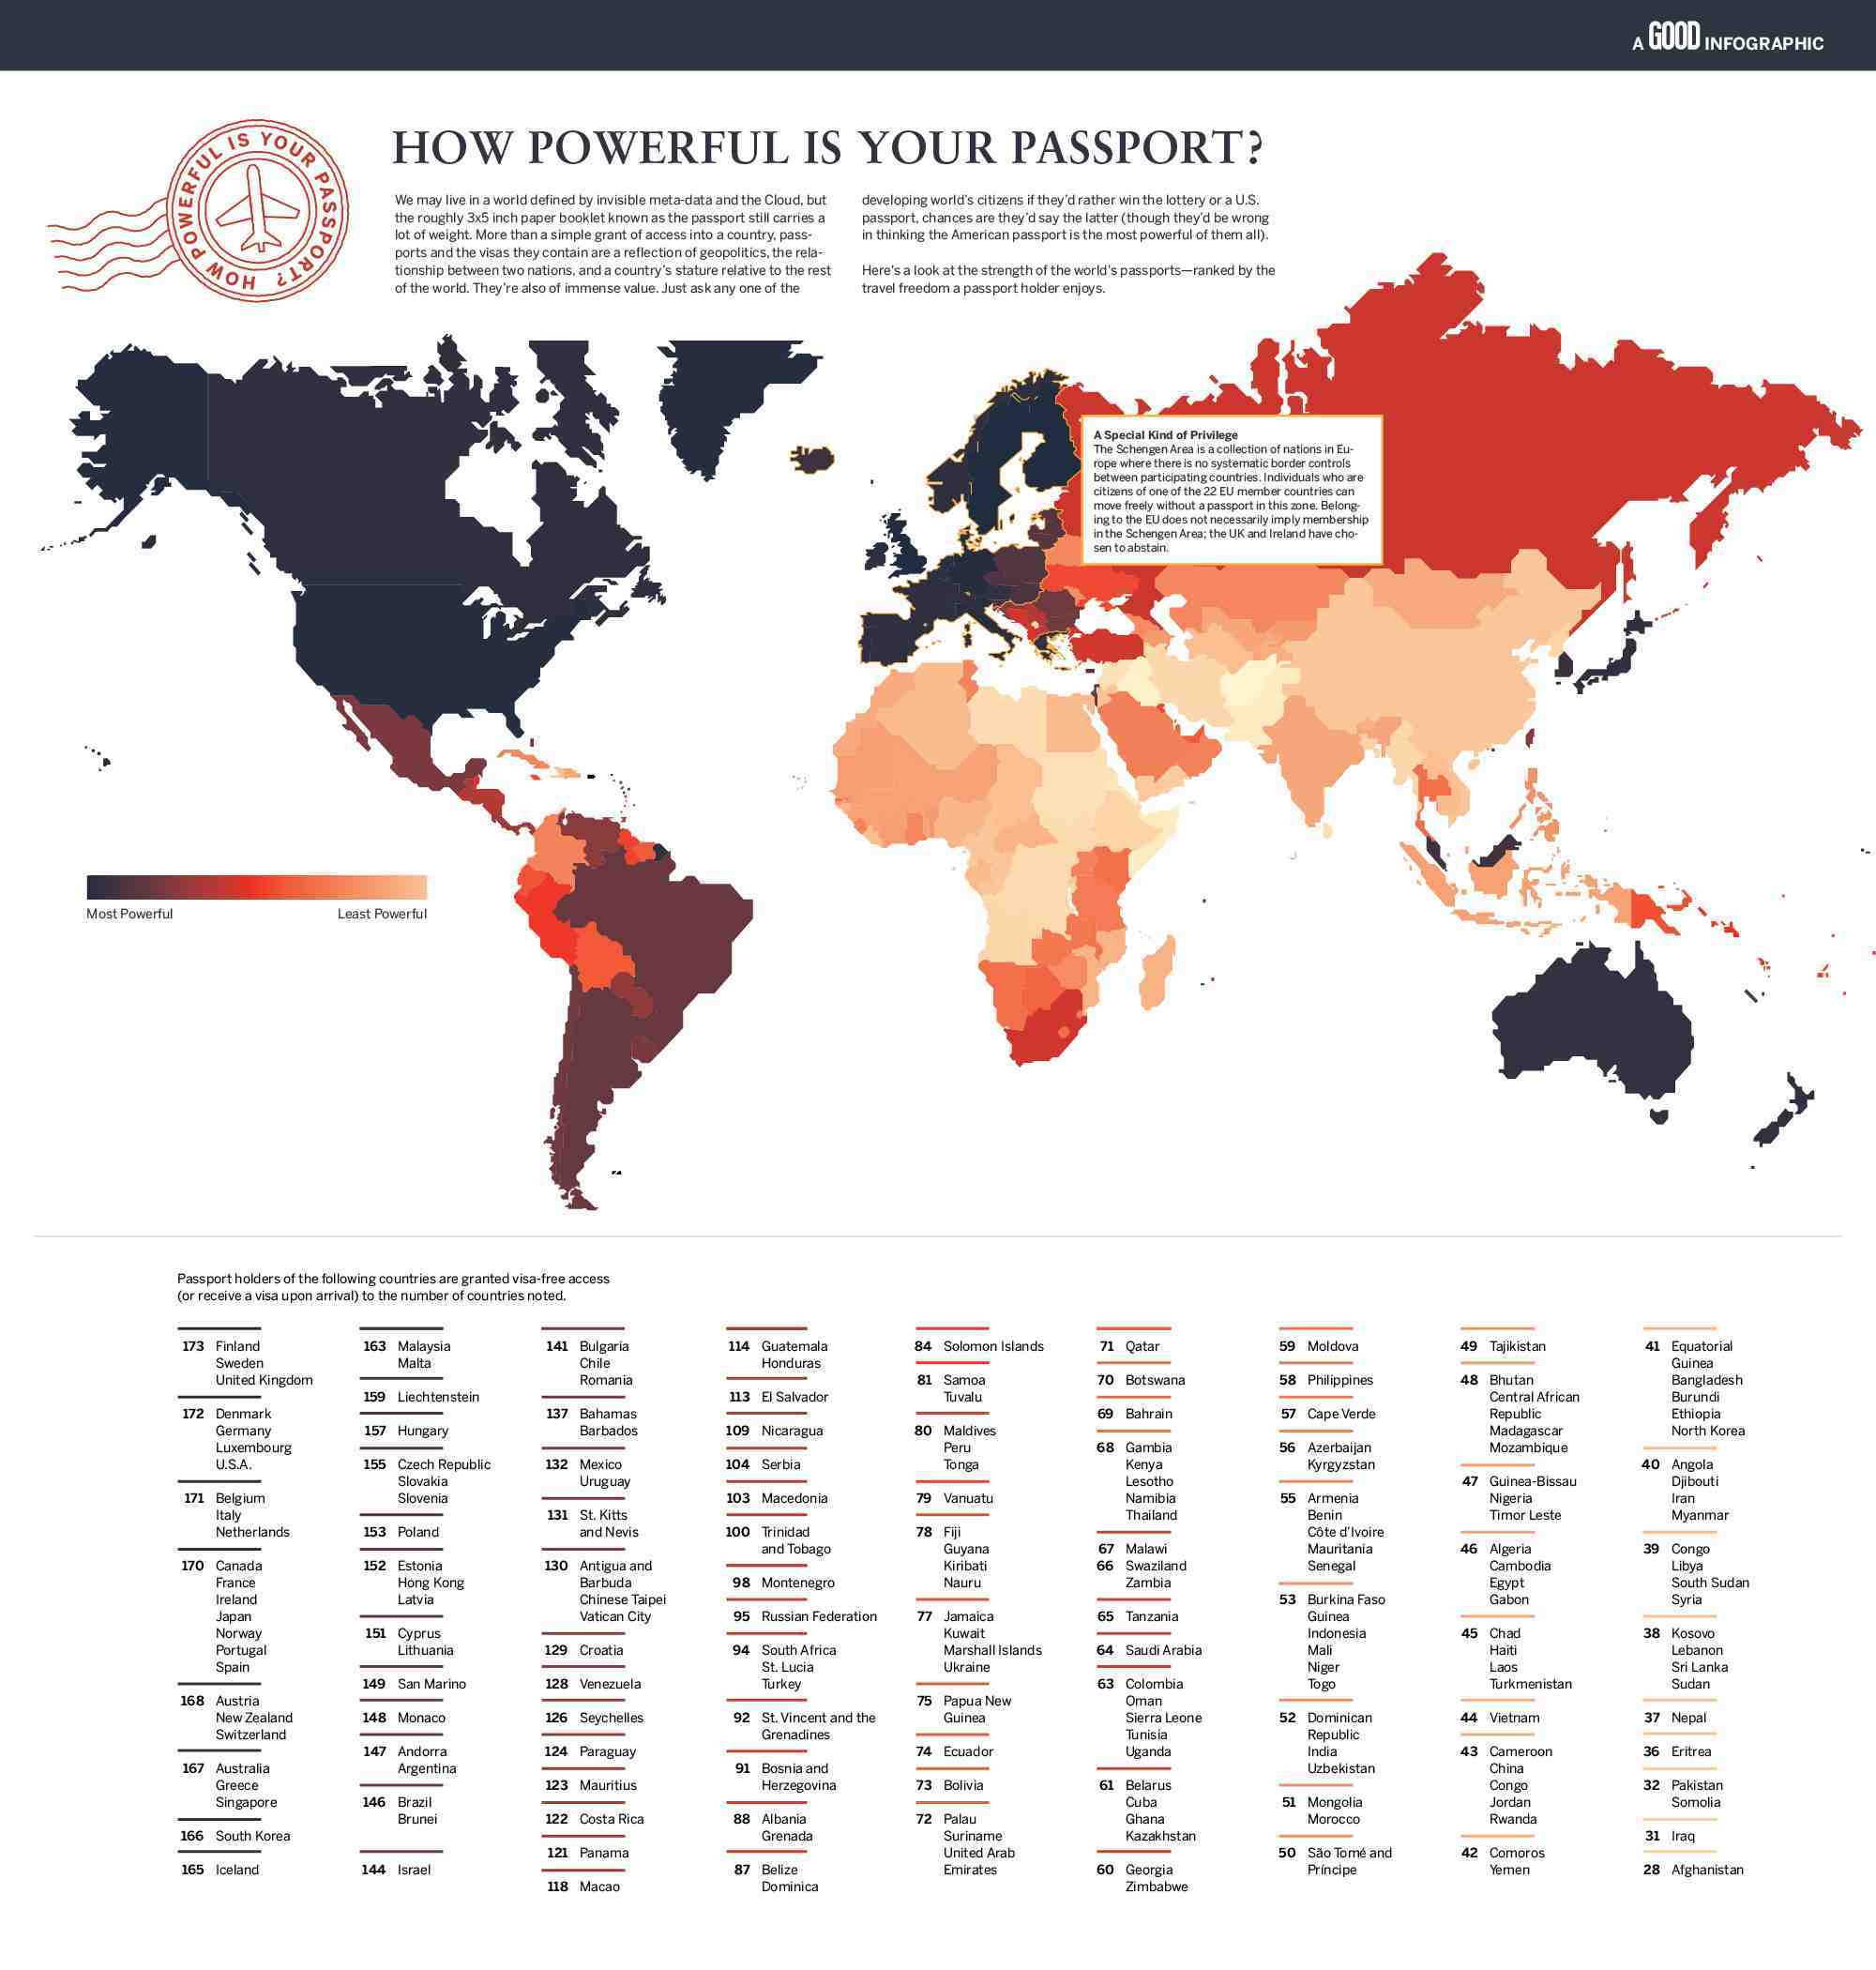 How Powerful is Your Passport?